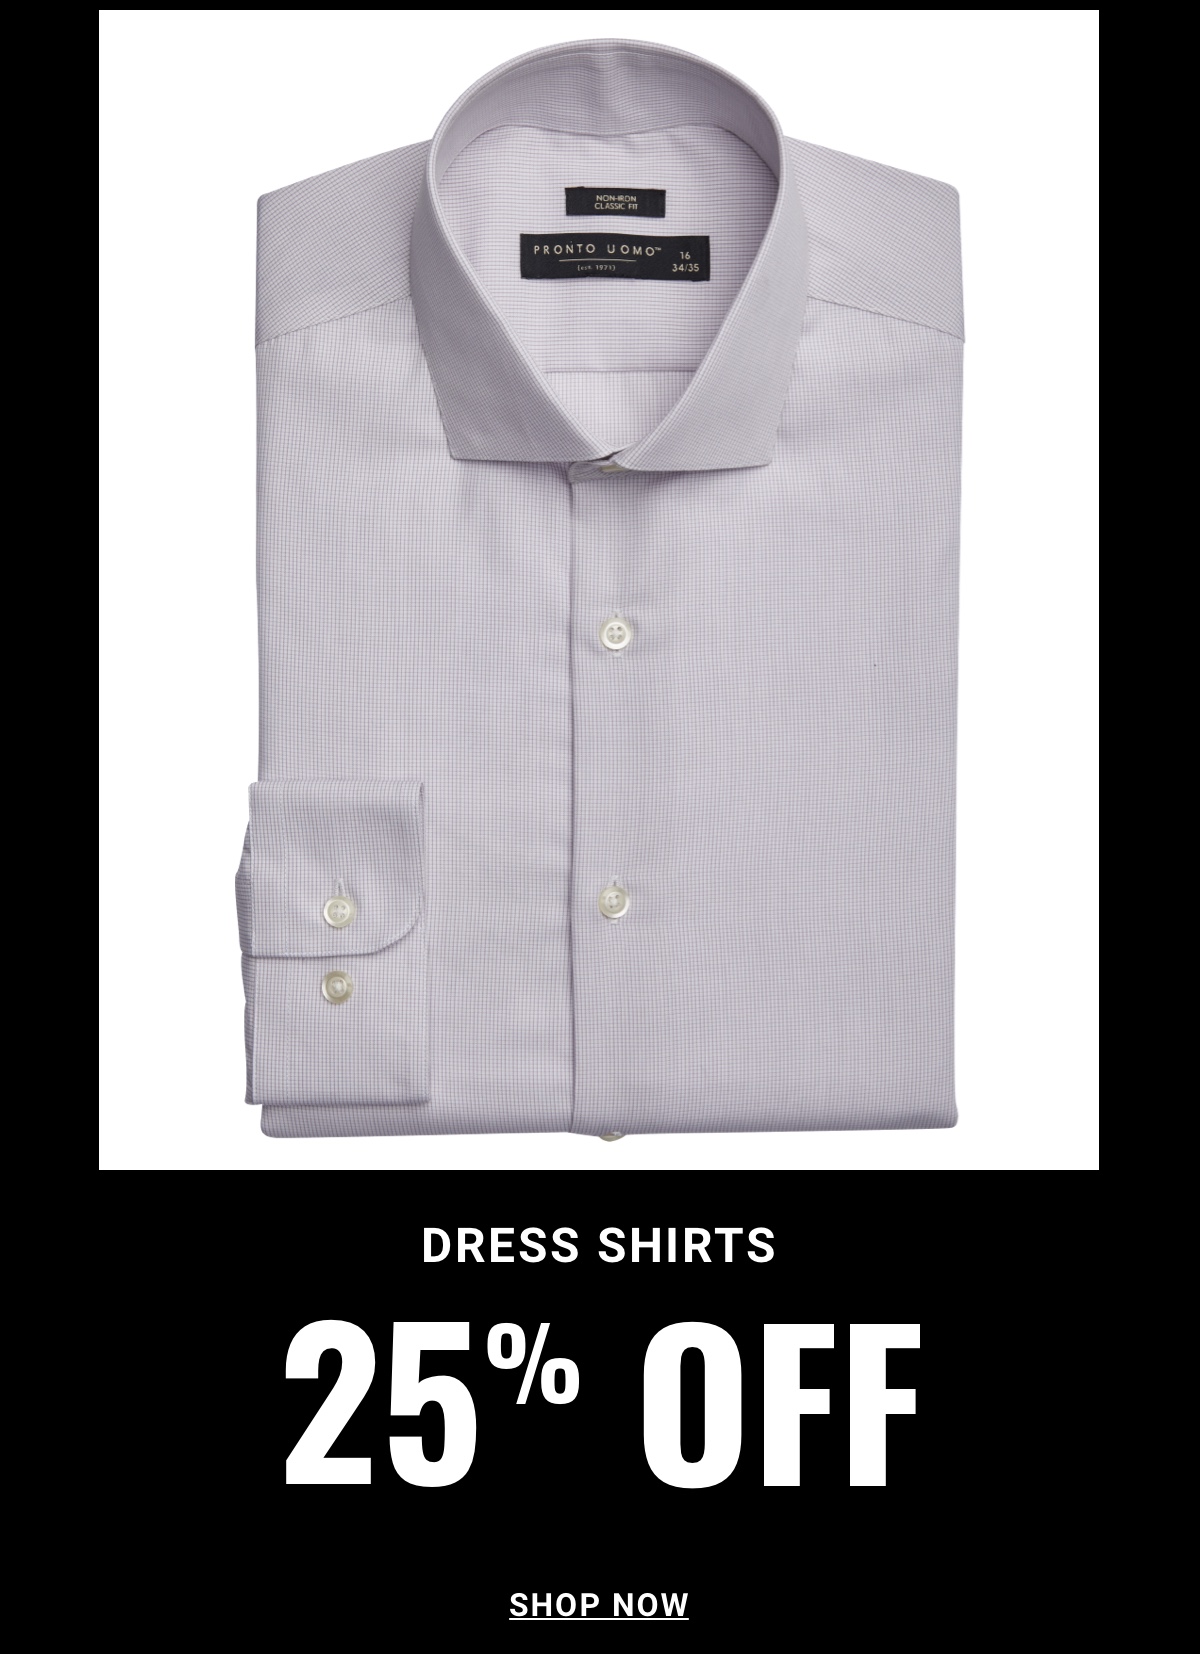 25% Off Dress Shirts. See terms.